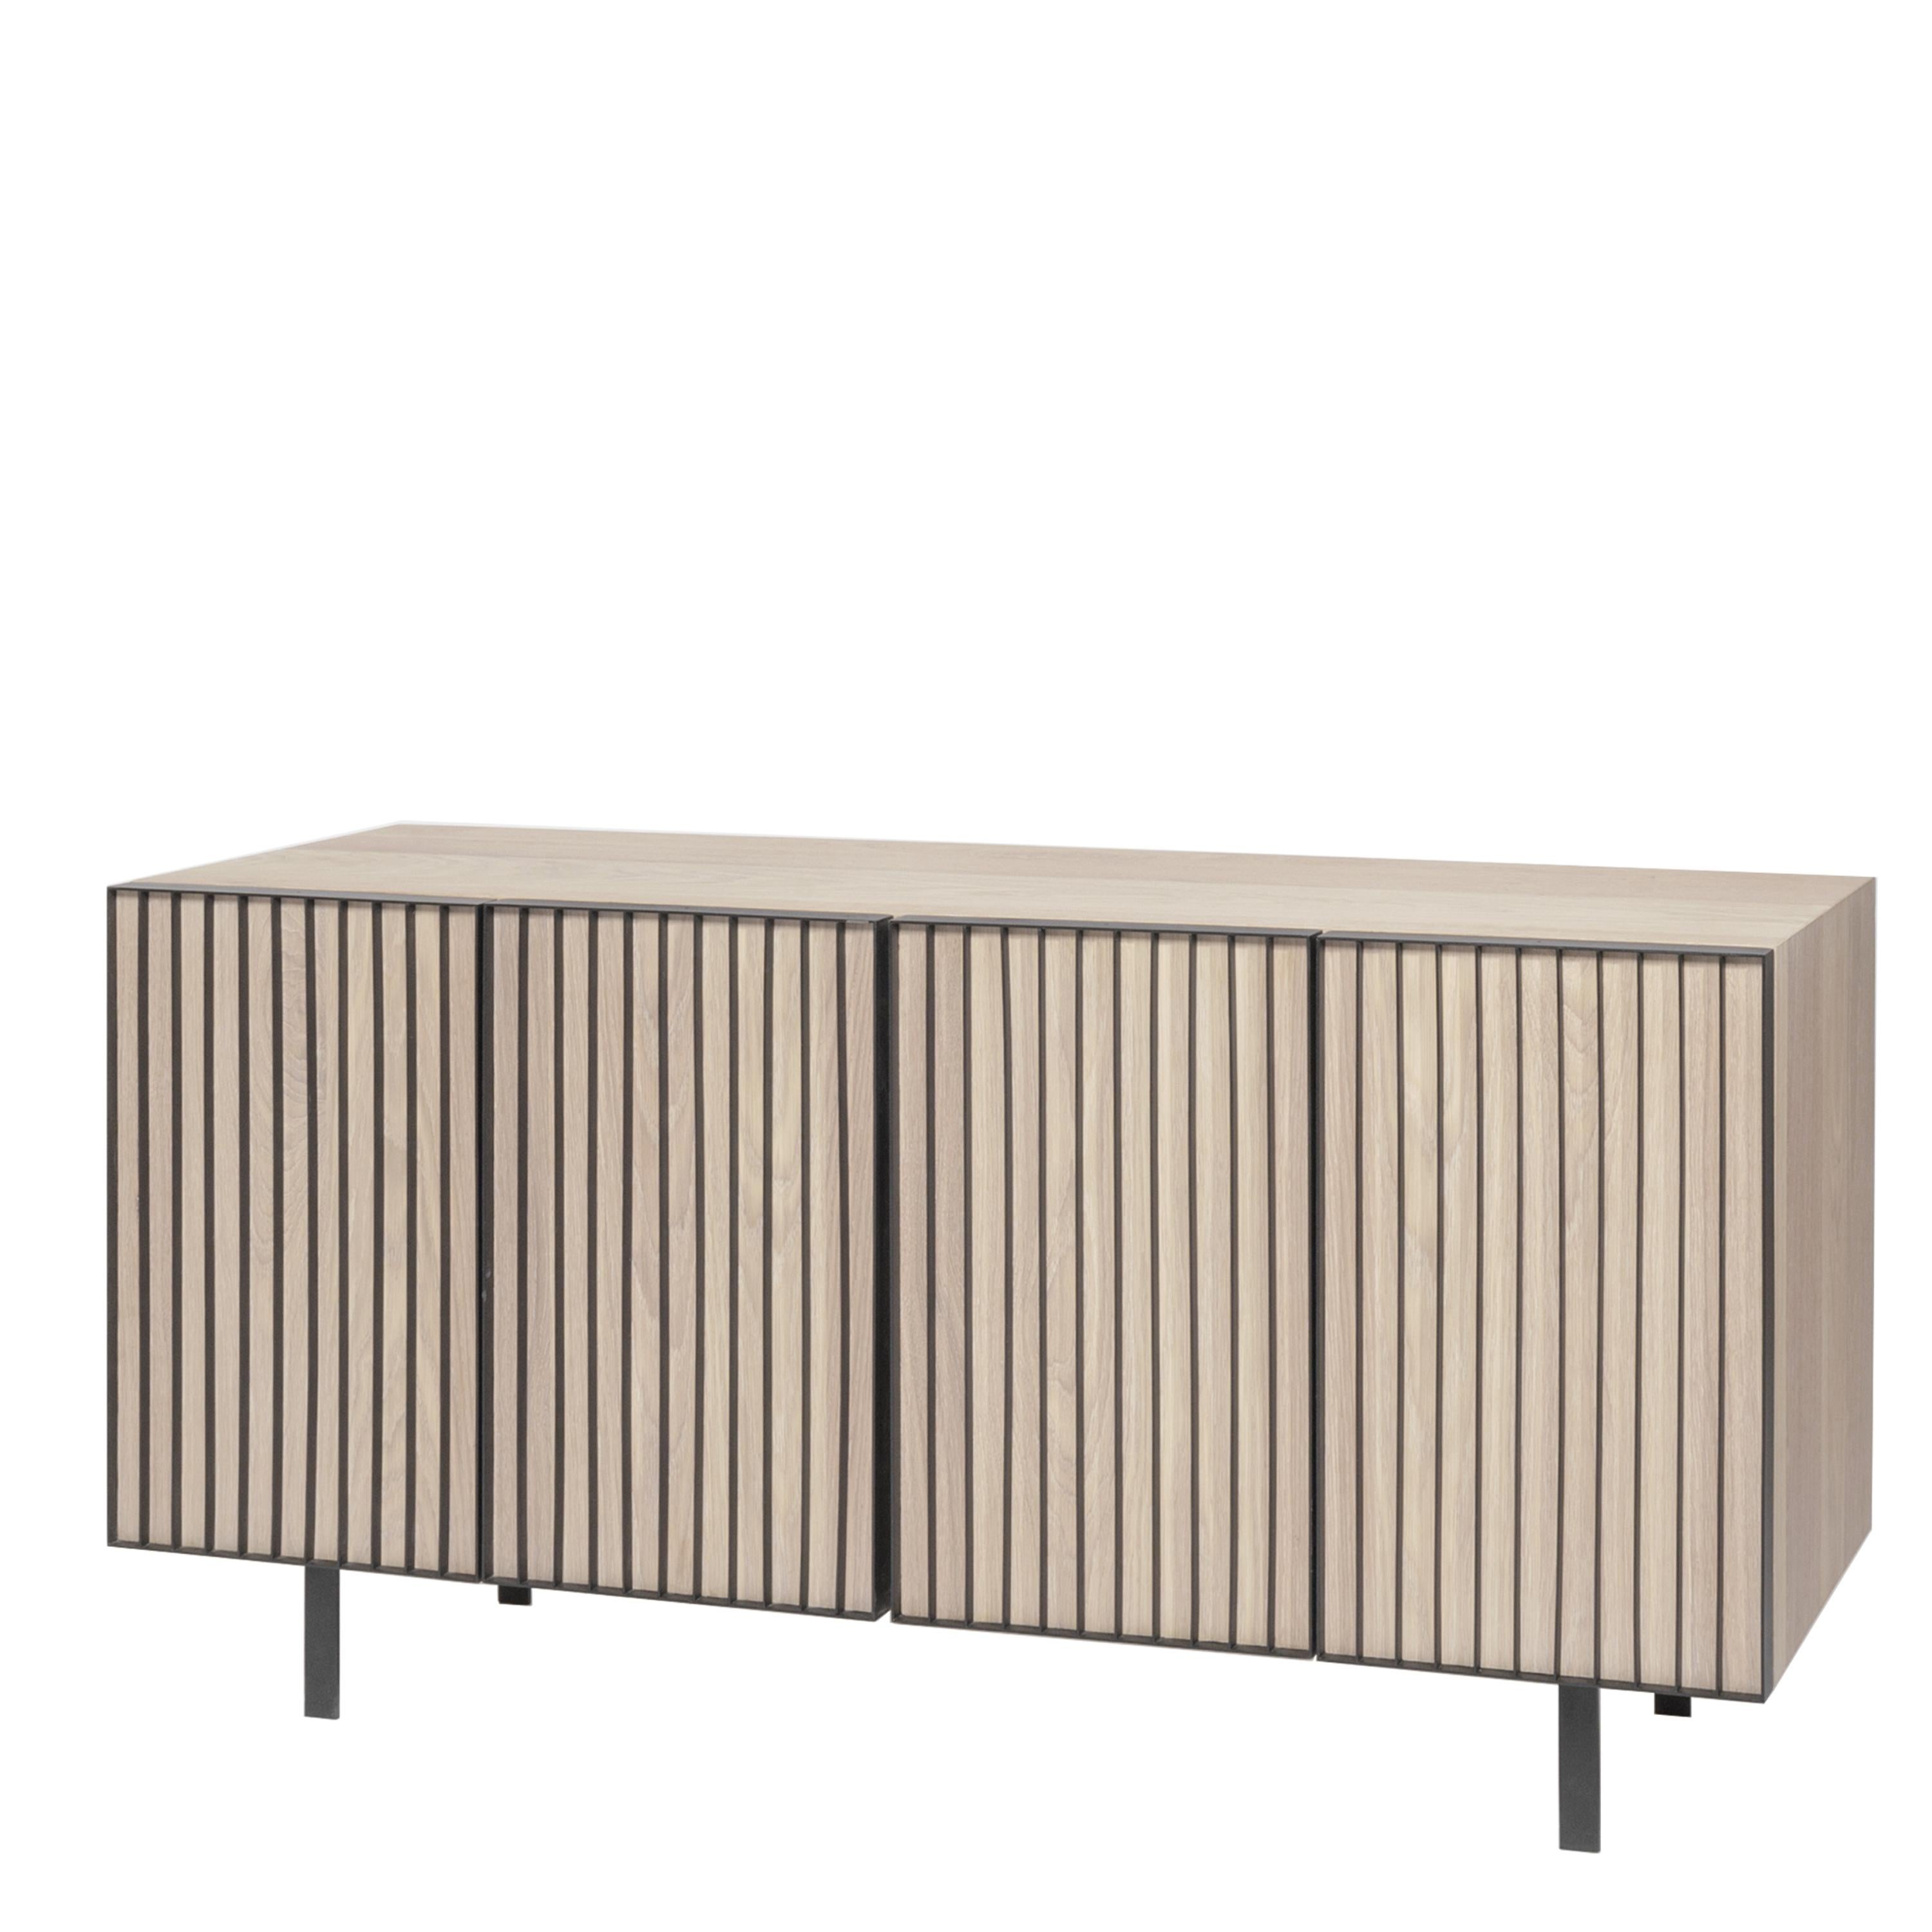 The Credenza Sombra takes inspiration from the quiet architecture of Chipperfield. Composed of steel legs and details on doors and covered in wood veneer, this credenza avoids noise and follows a clean and essential line.  Production time: 6-8 weeks